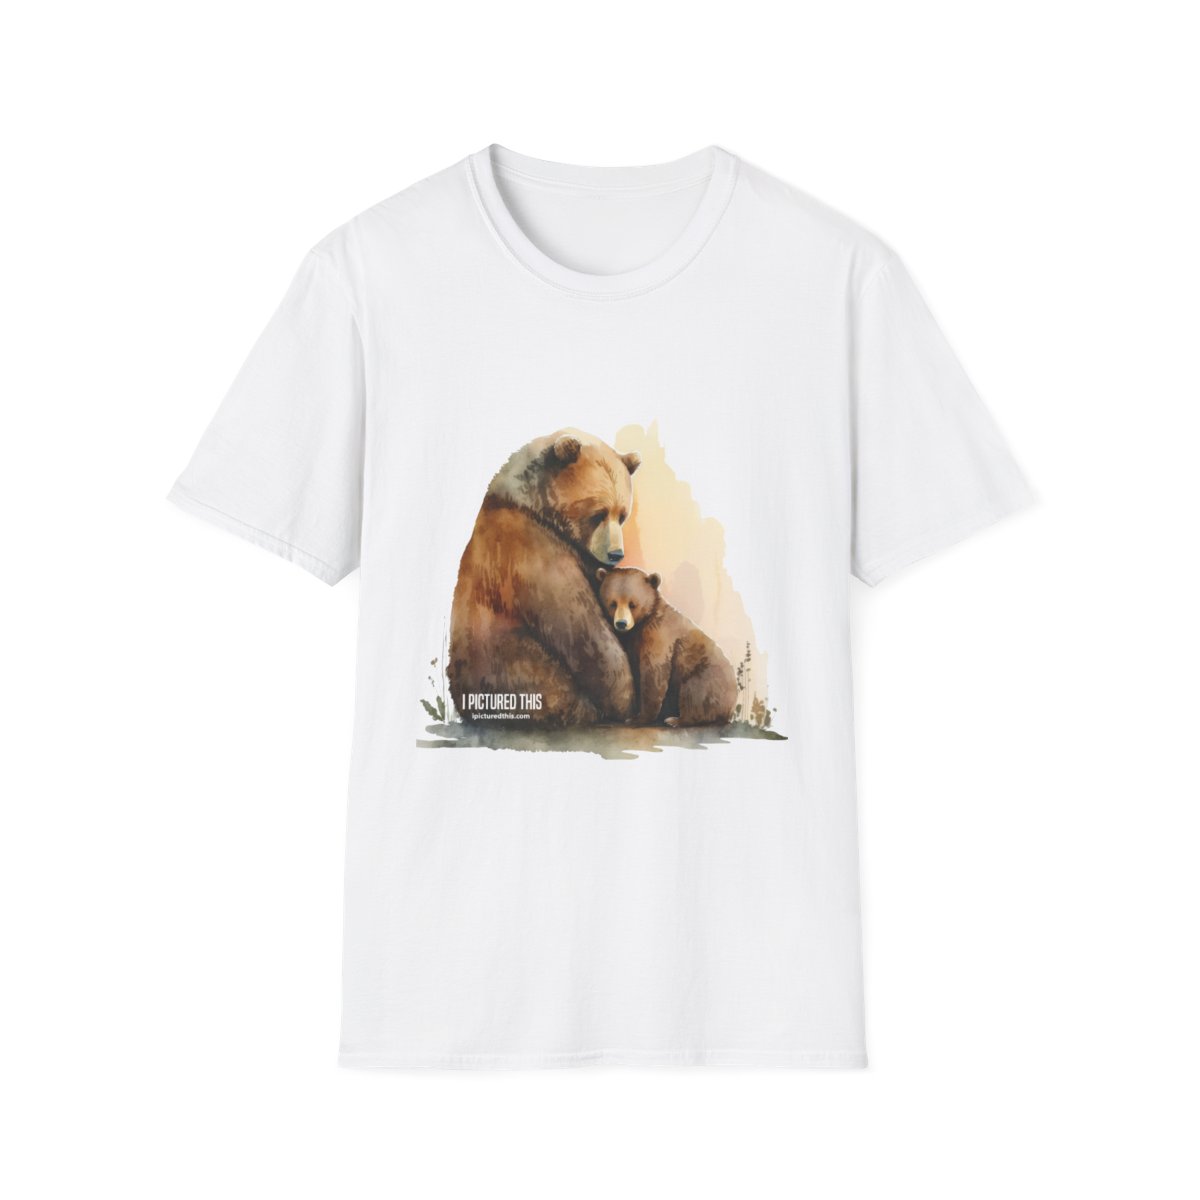 mama bear with baby on white t-shirt